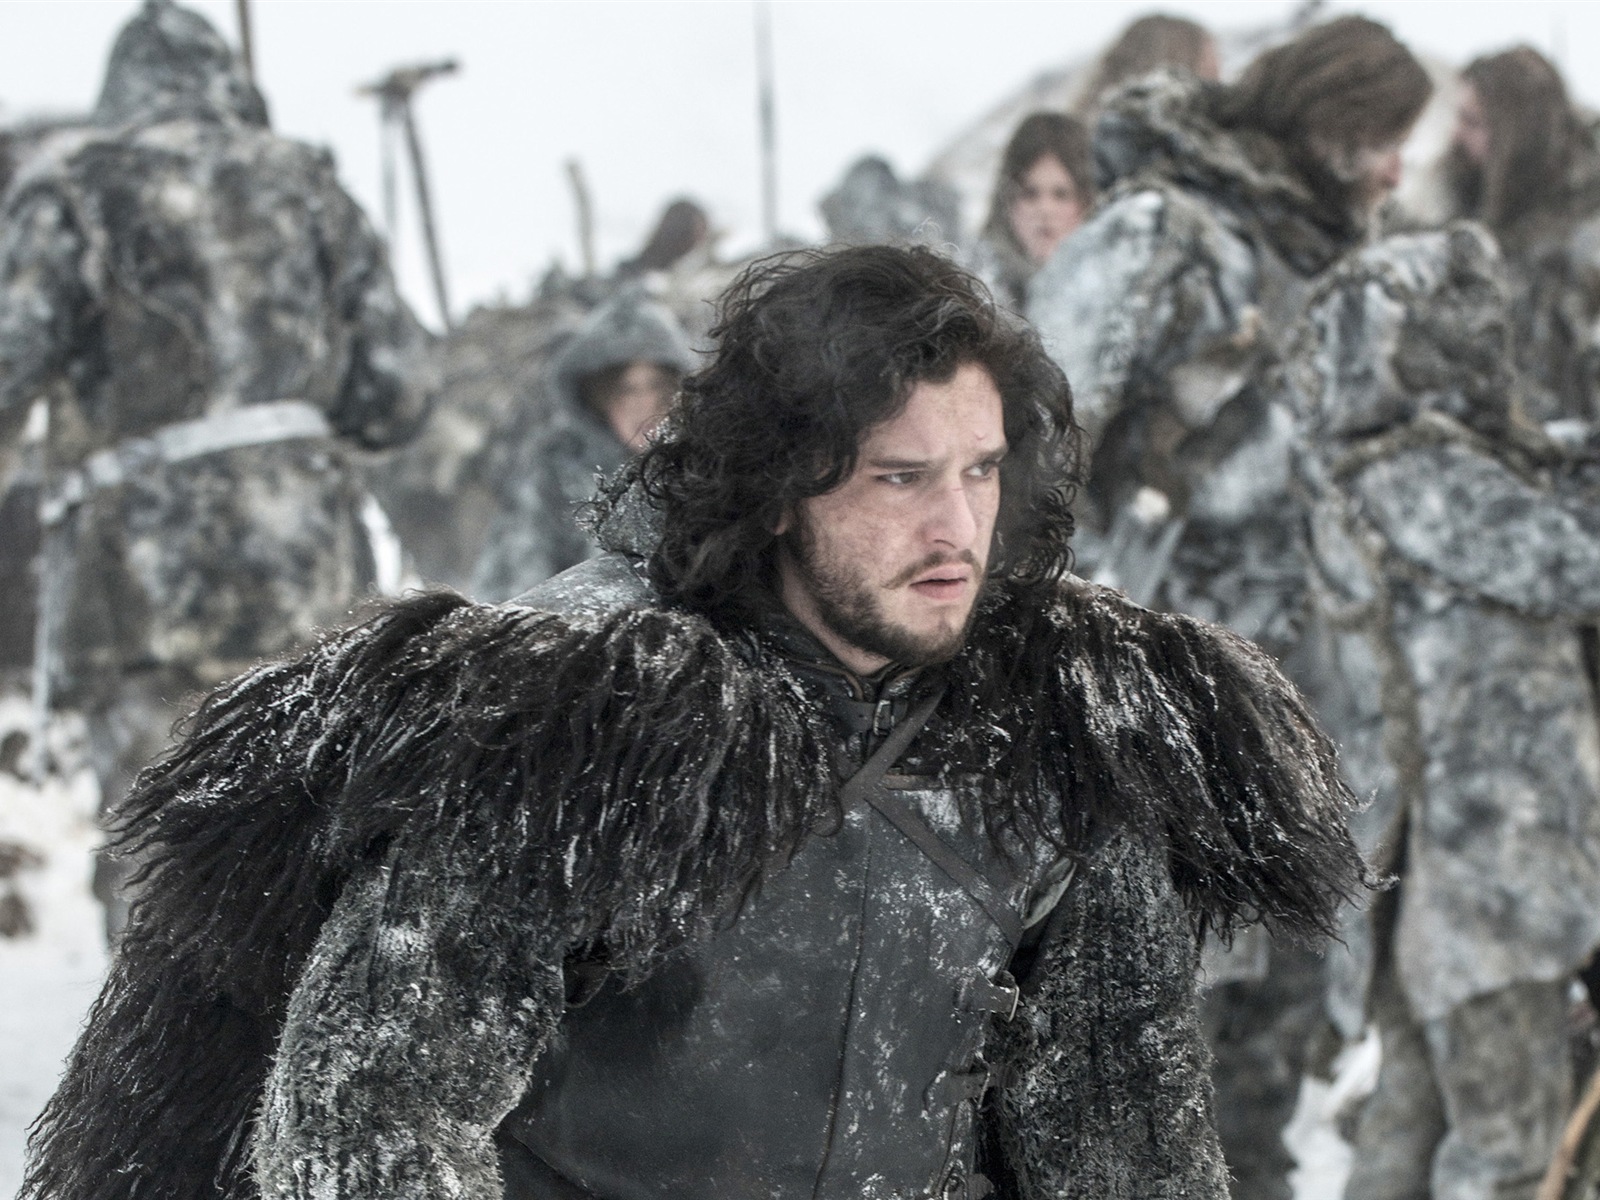 A Song of Ice and Fire: Game of Thrones 冰與火之歌：權力的遊戲高清壁紙 #37 - 1600x1200